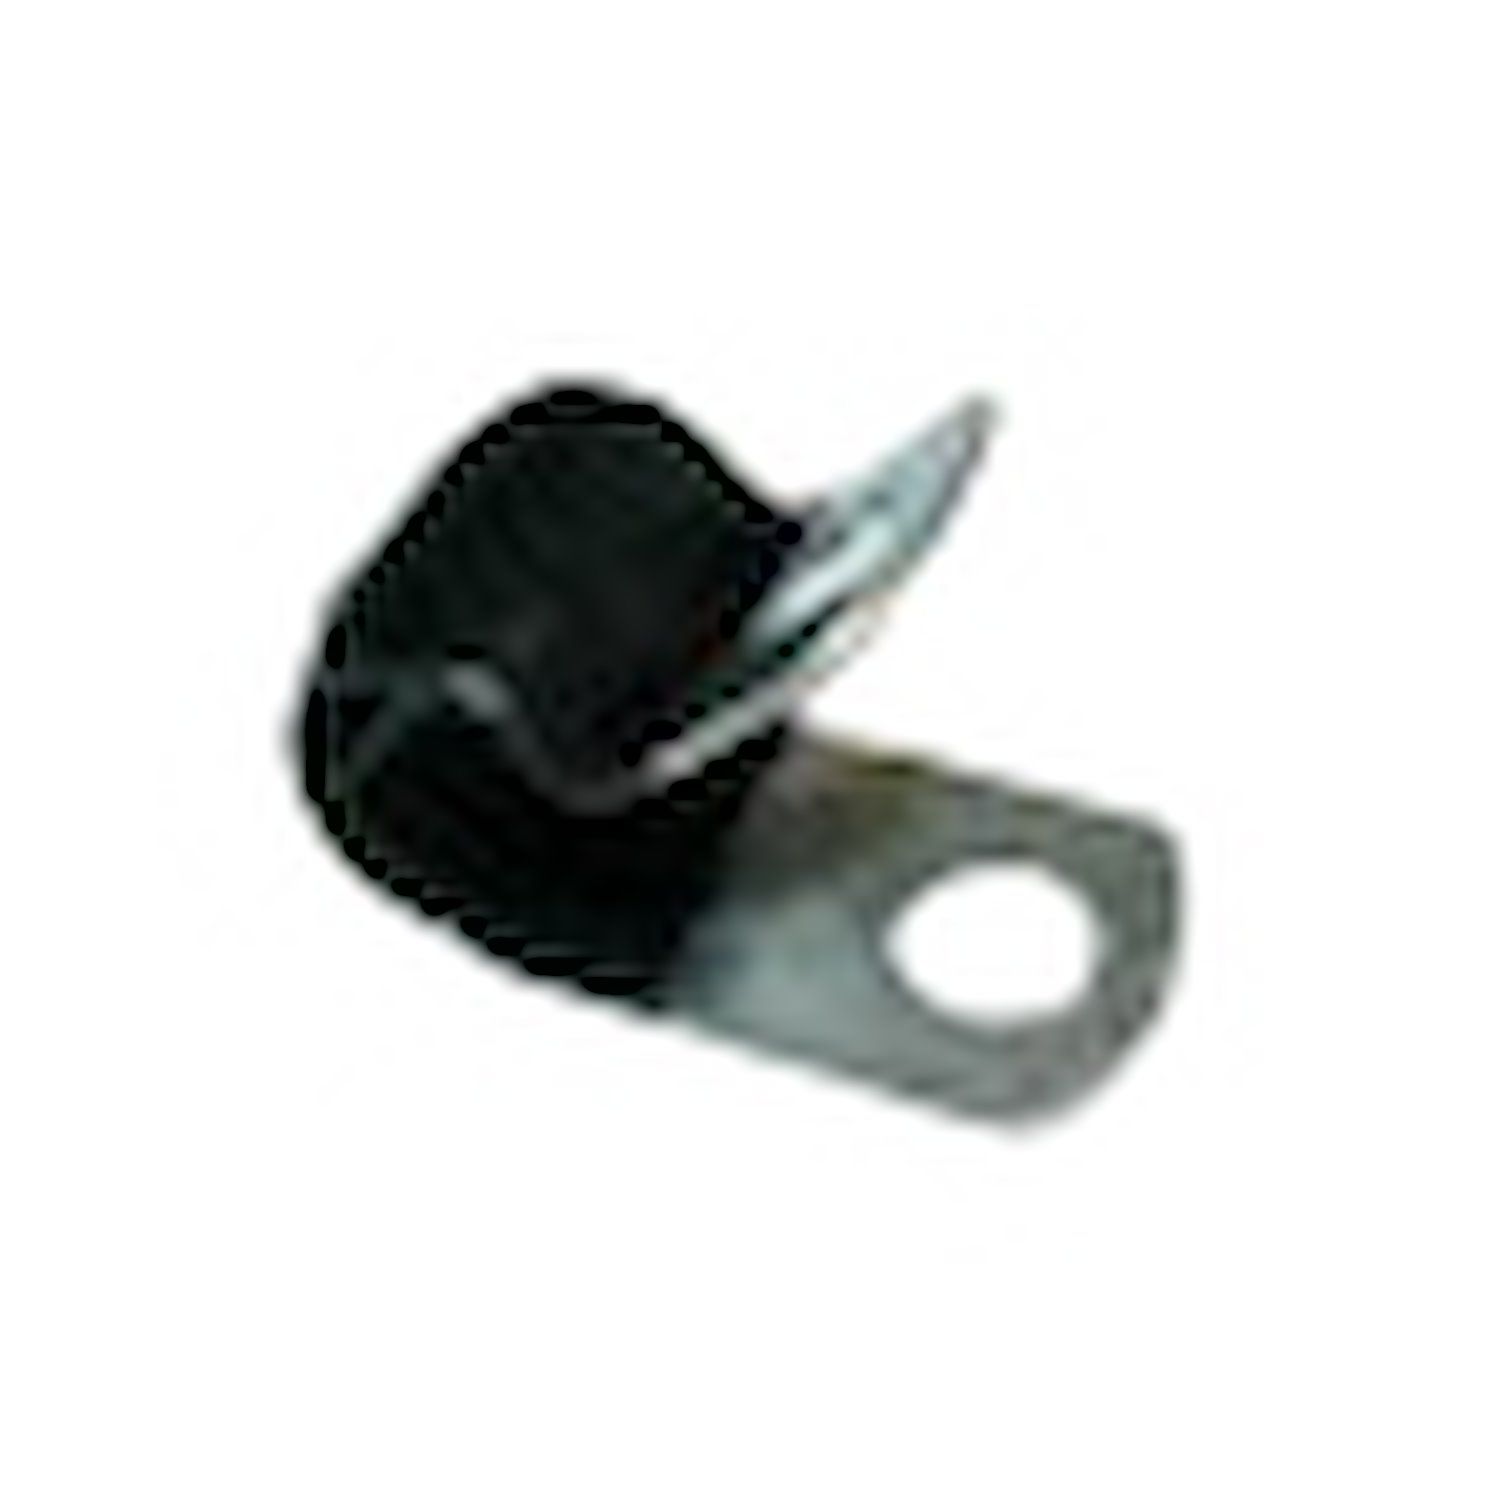 Line Clamps Rubber Insulated Line Clamps 1/4 in